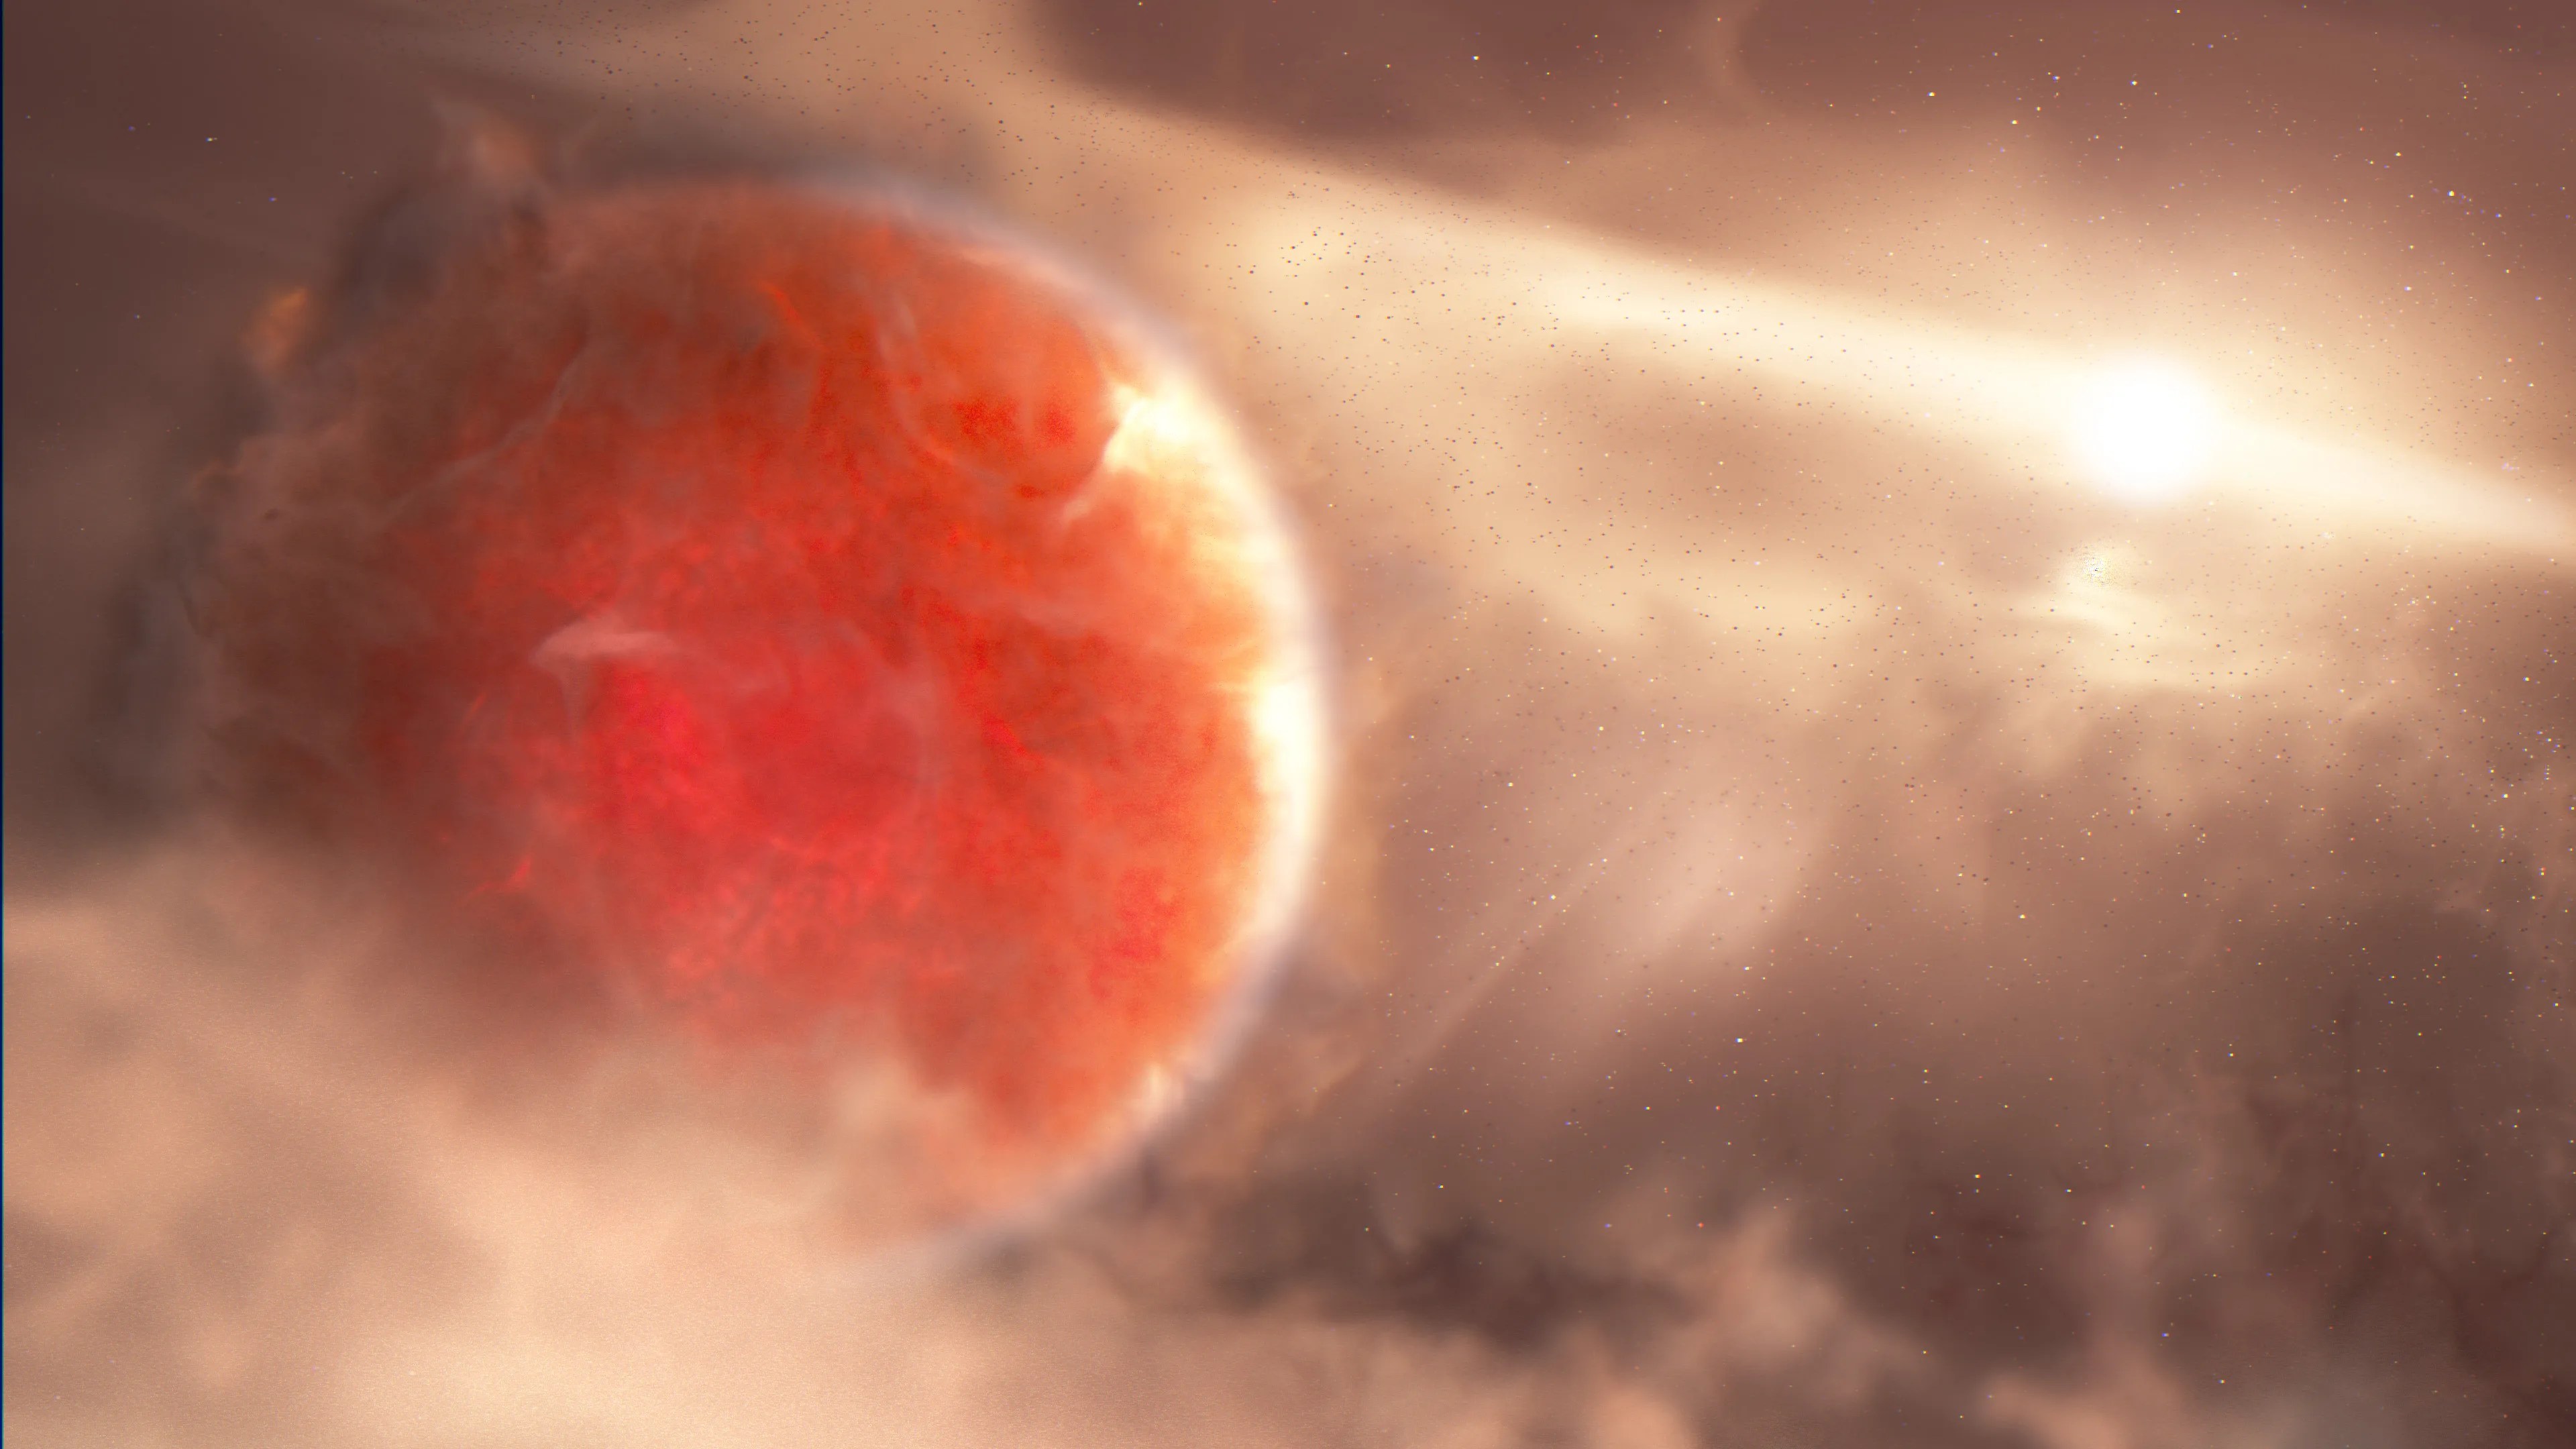 Orange-red planet in a swirl of gas and dust